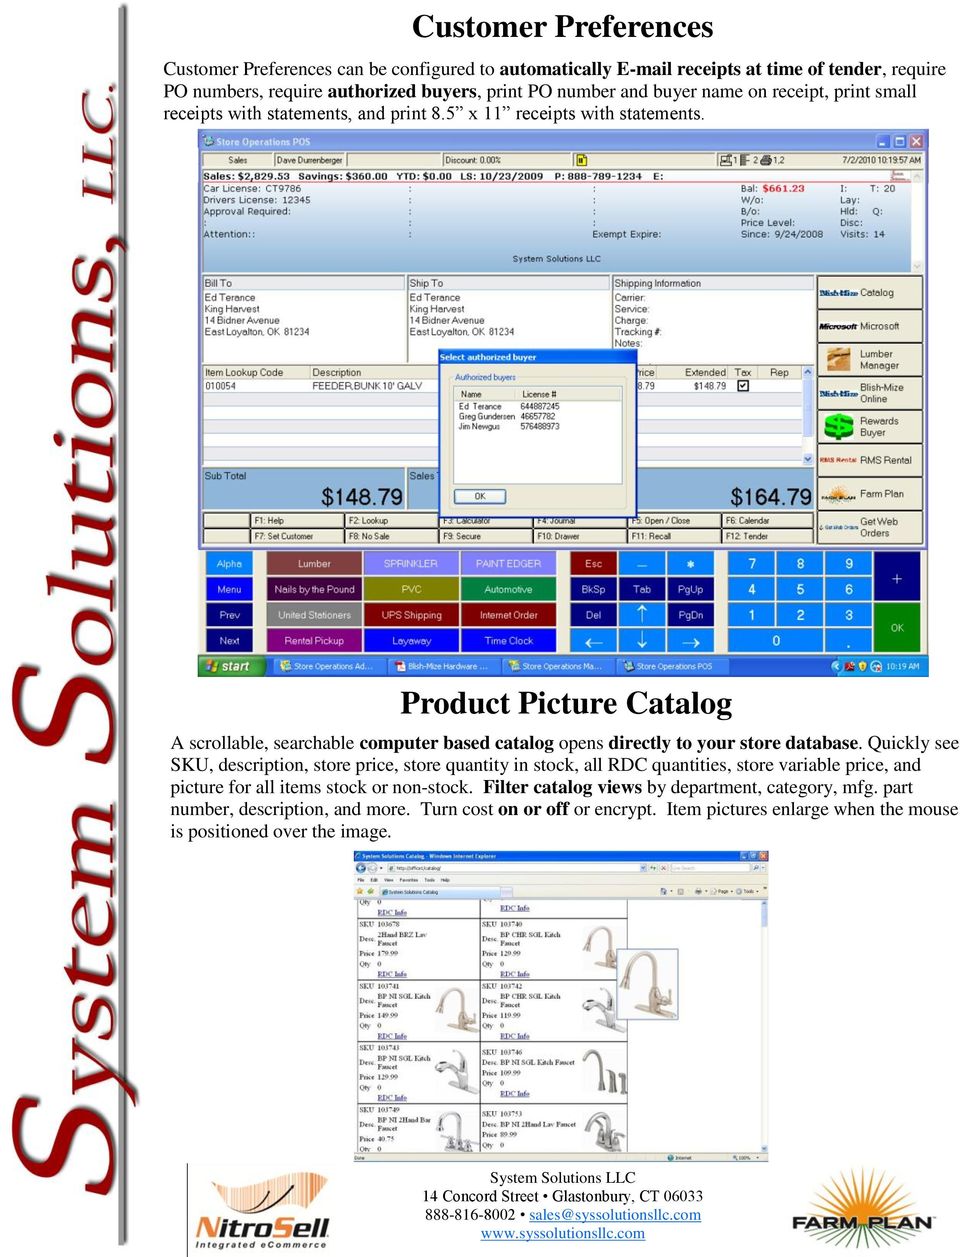 Product Picture Catalog A scrollable, searchable computer based catalog opens directly to your store database.